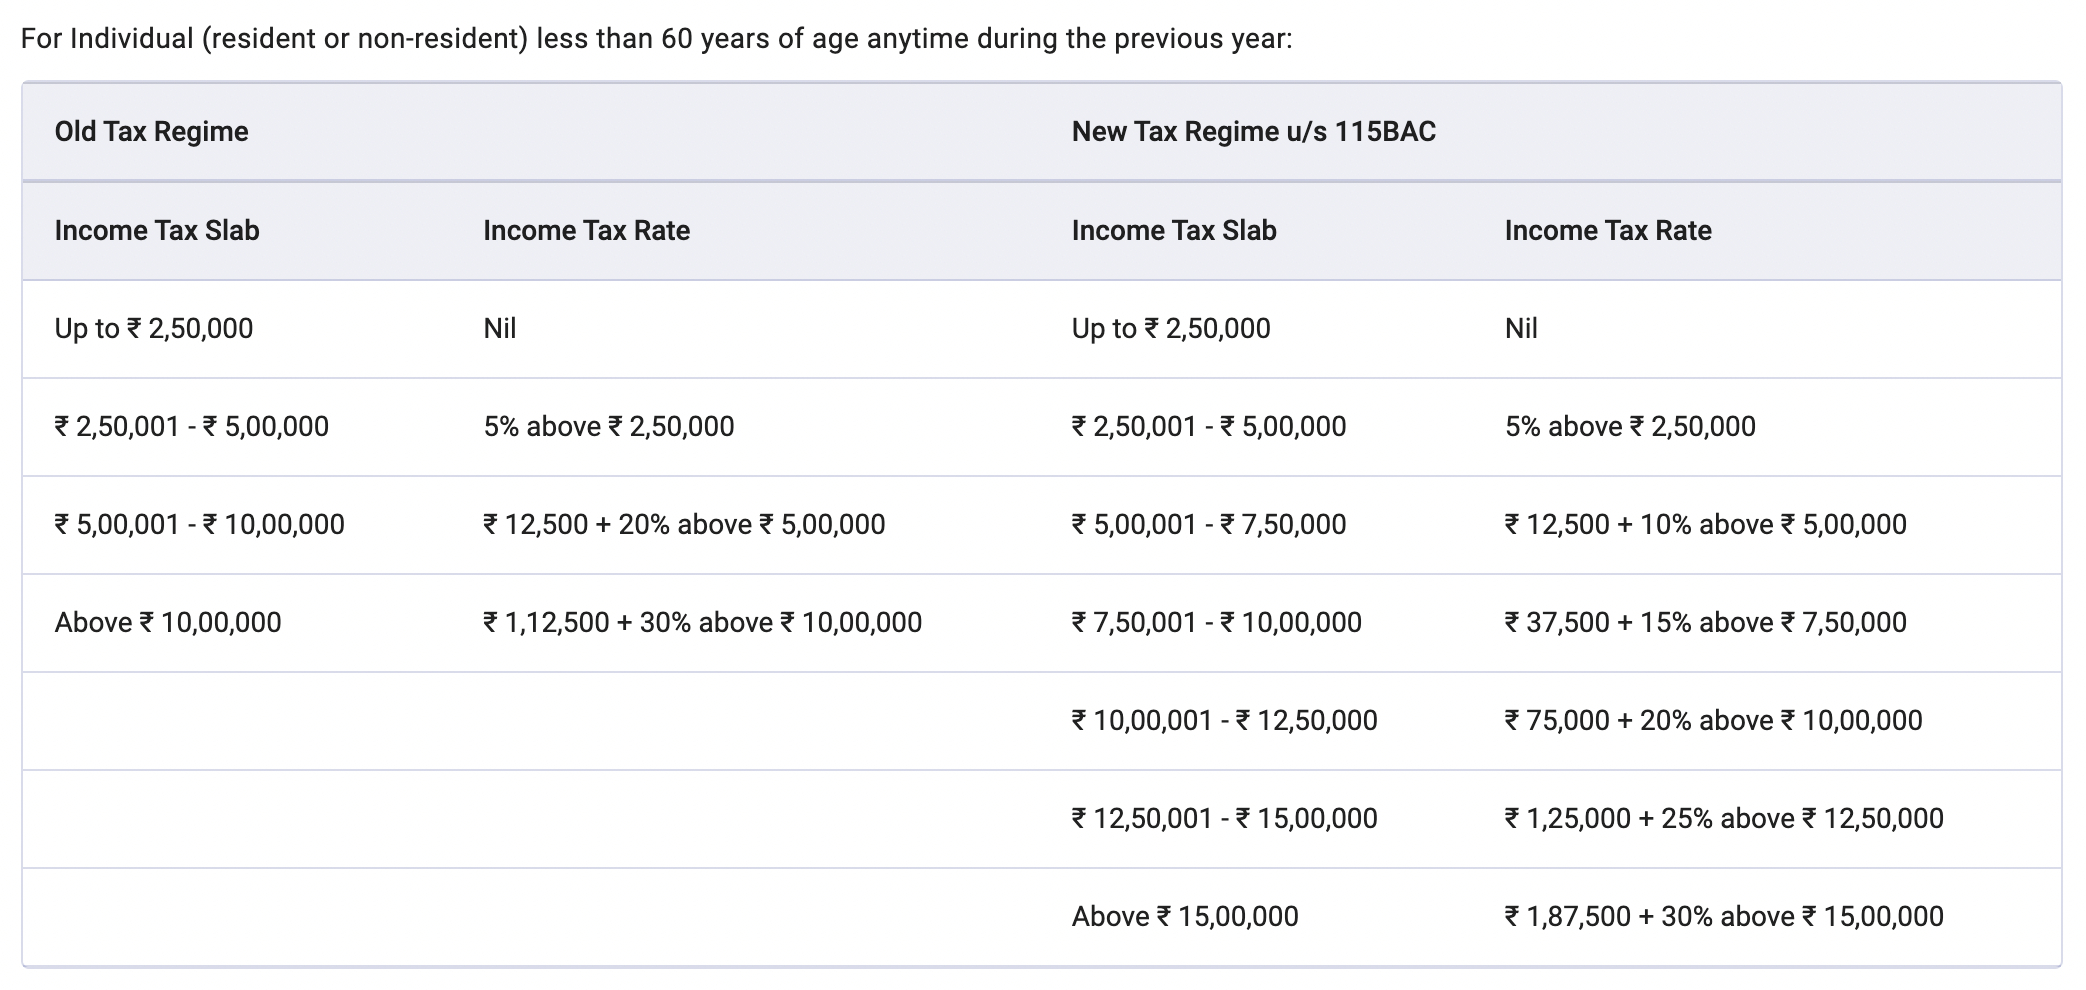 Indian old and new tax regimes